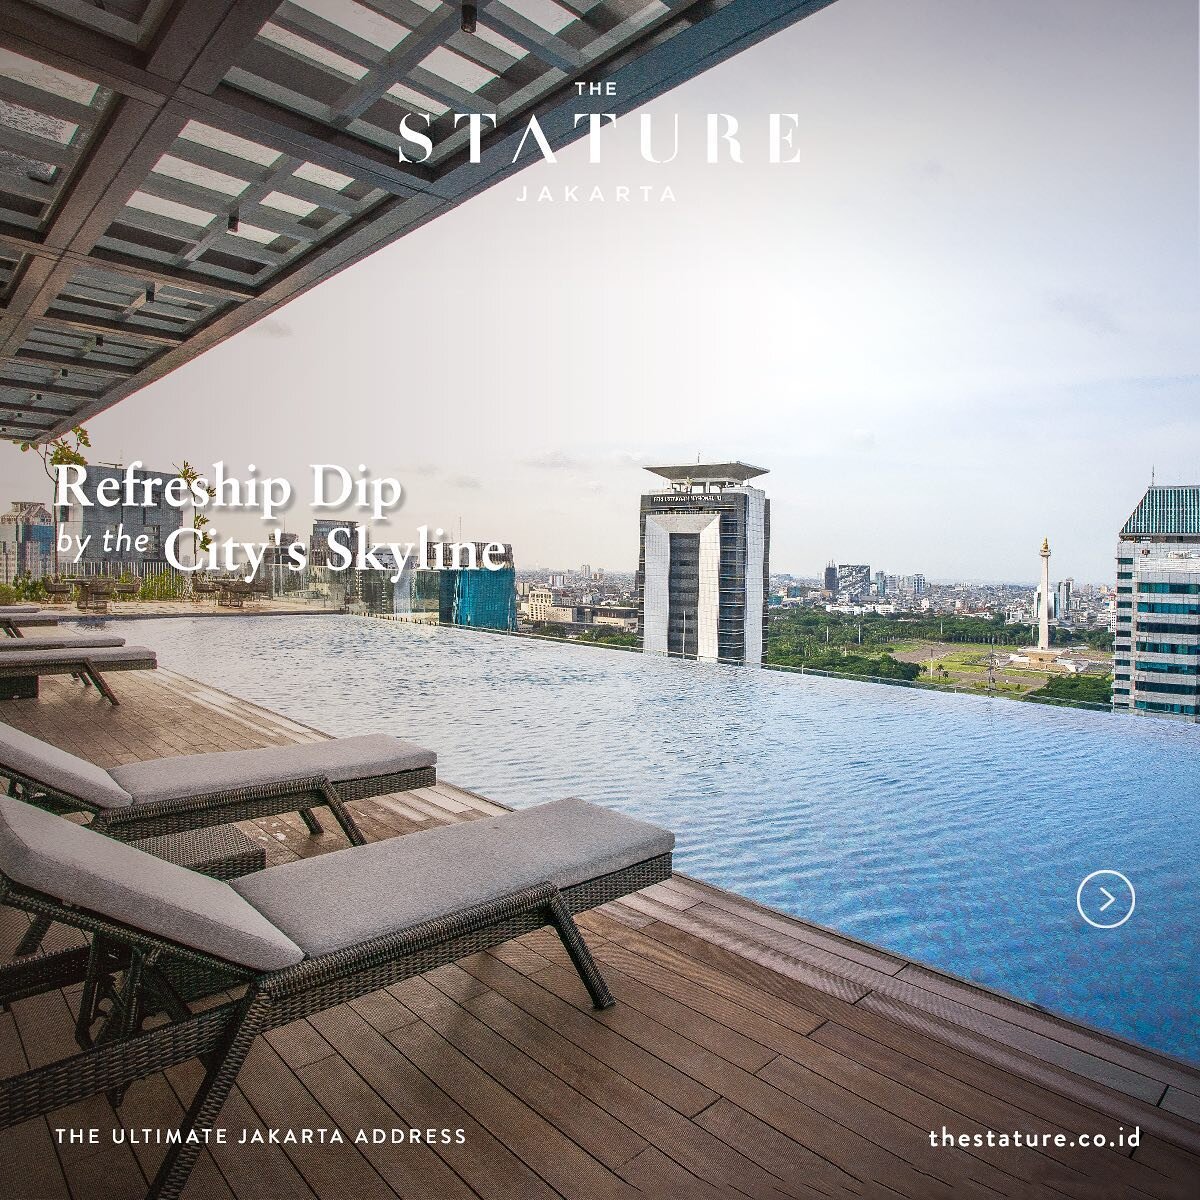 Take a refreshing dip while soaking in the stunning views of Jakarta skyline. Our Rooftop Infinity Pool is a stress-relief destination for those looking to relax and unwind during the day. Come for a swim, stay for the view, and experience the #Statu